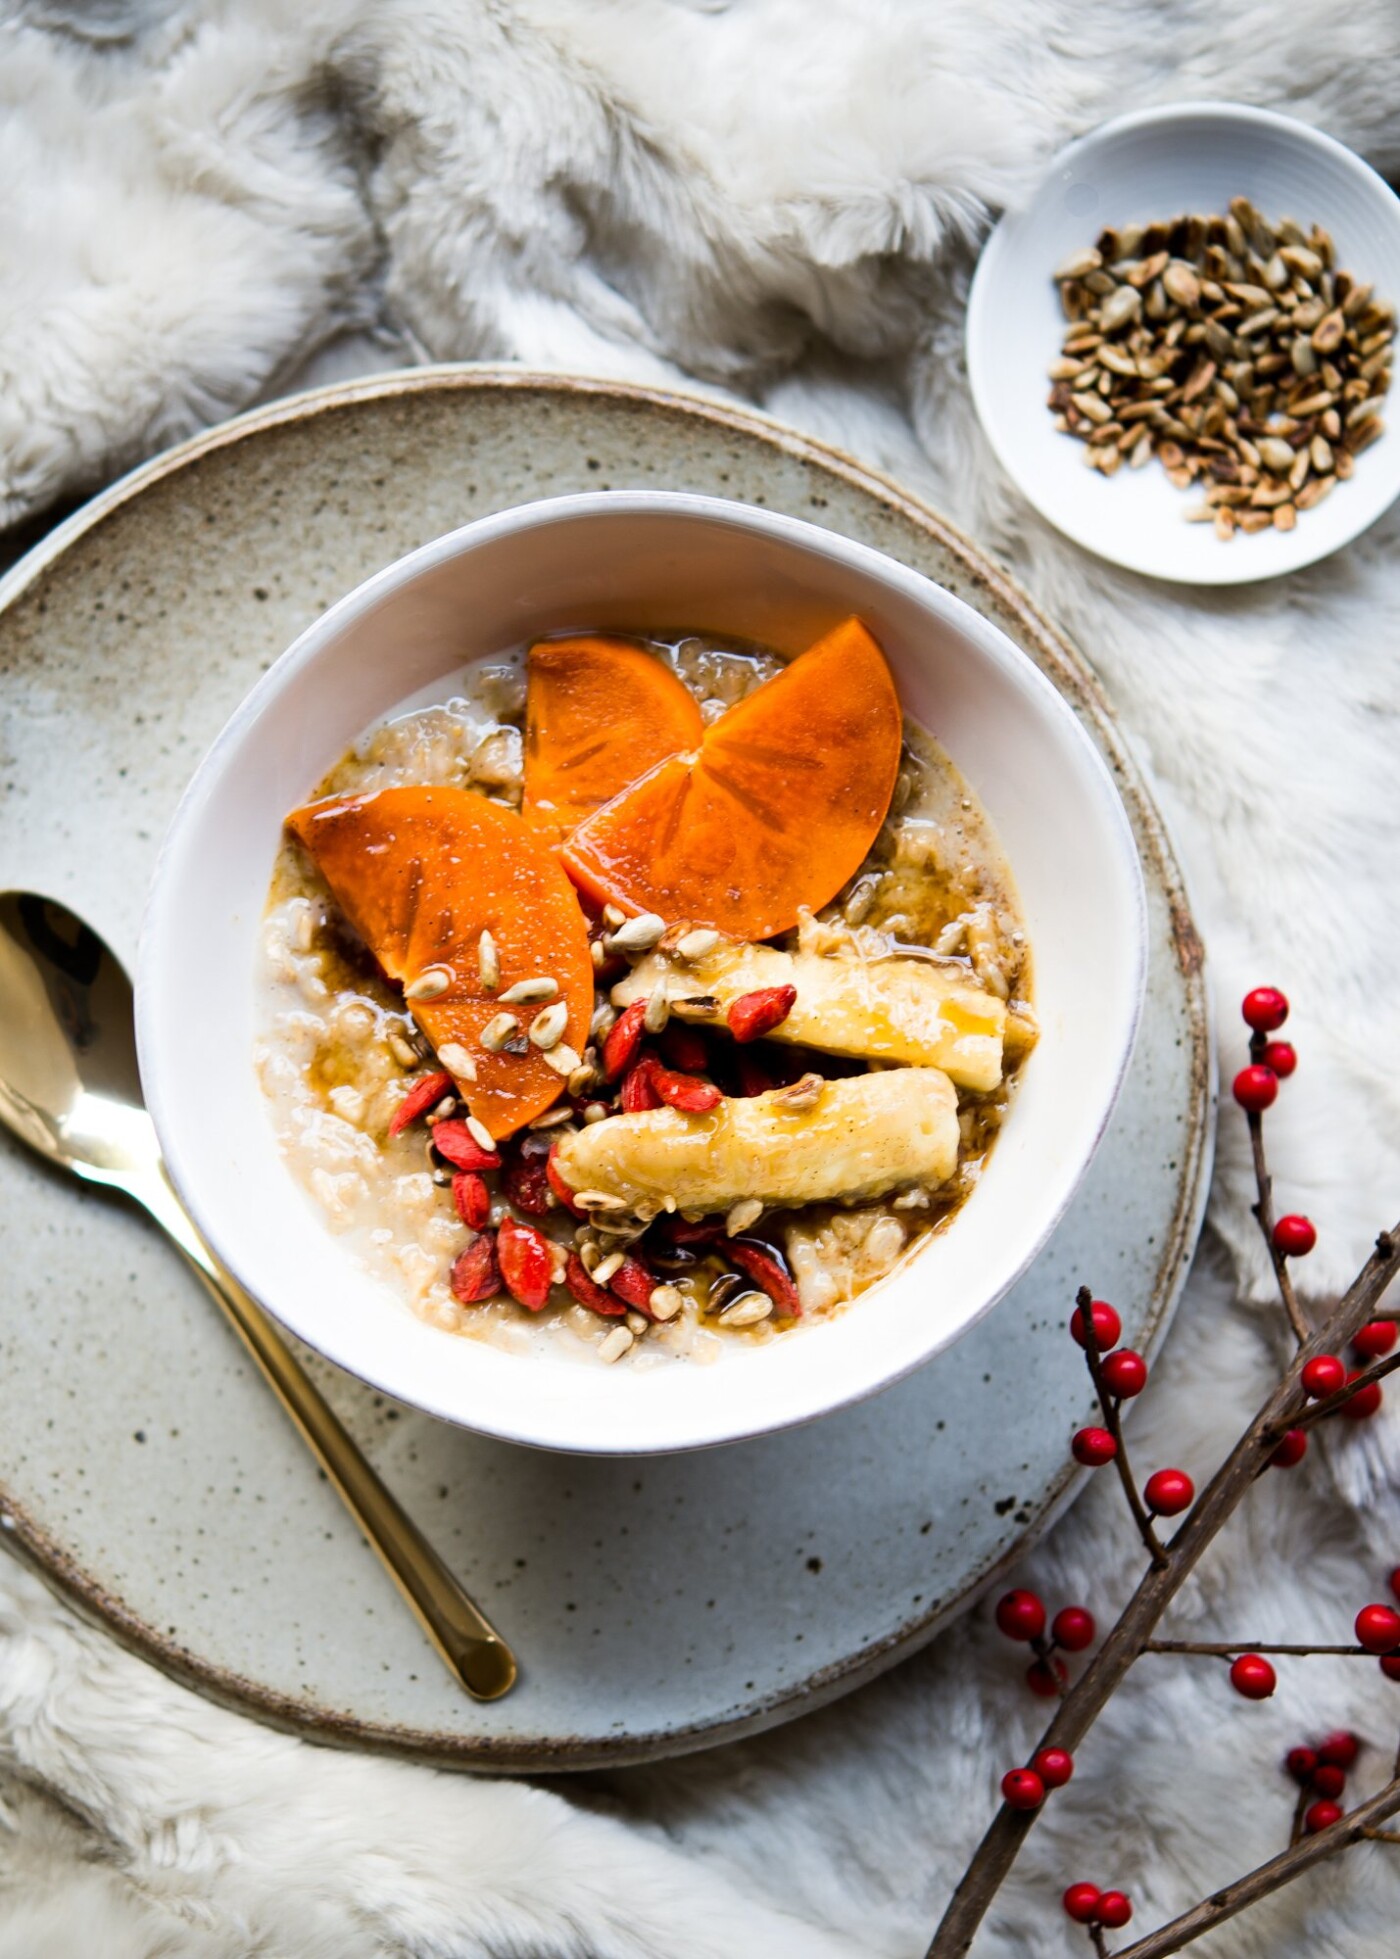 A cozy breakfast for wintery mornings is captured with this warm and hearty chai-spiced porridge adorned with slices of persimmon, chunks of banana, pan toasted sunflower seeds and goji berries.  The fur throw backdrop adds a touch of elegance, texture, and accentuates that warm and fuzzy feeling.